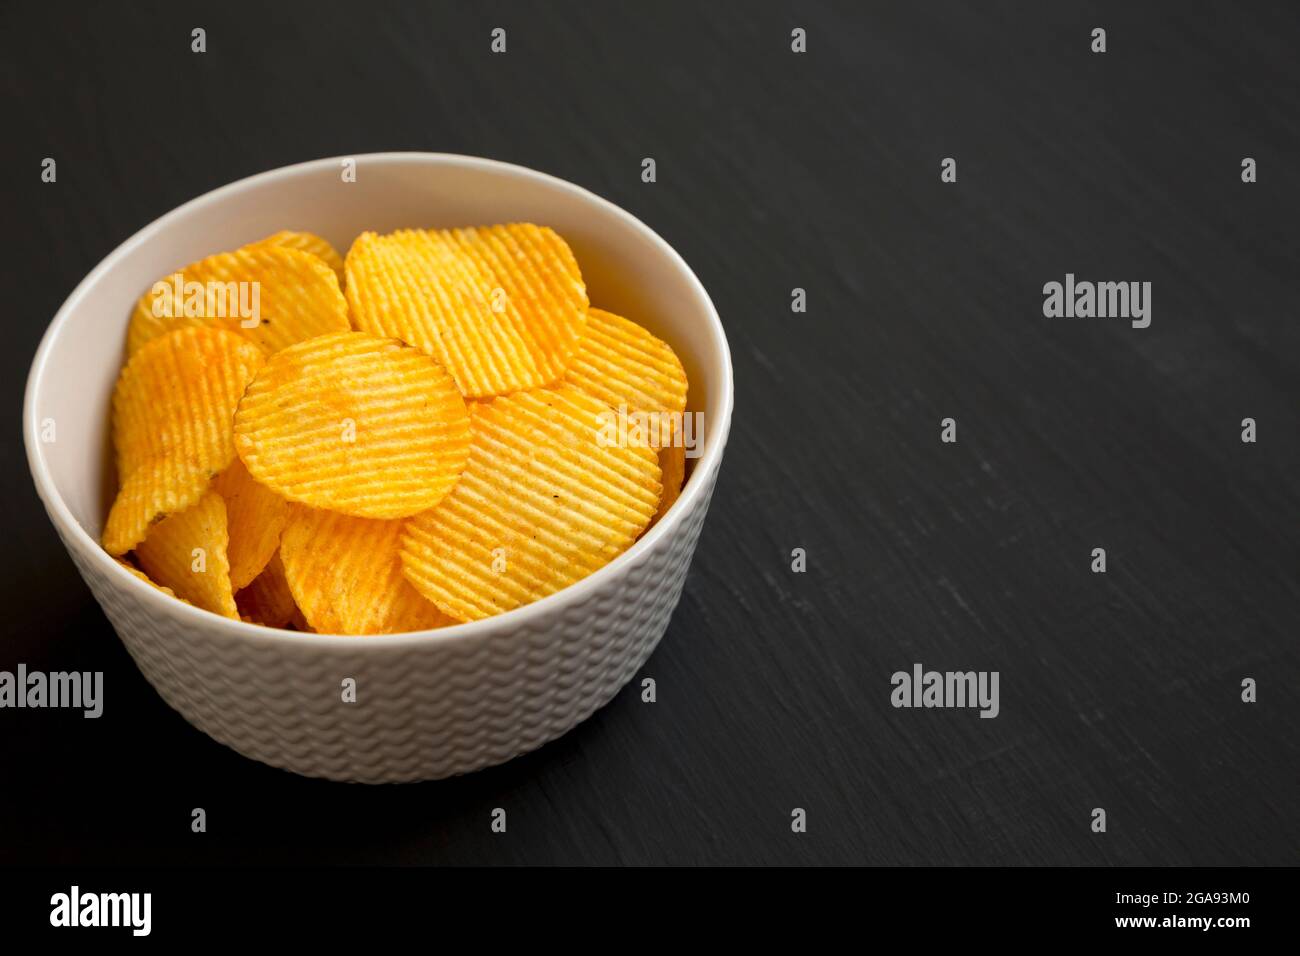 Ruffled Cheese Potato Chips in a Bowl on a black background, side view. Copy space. Stock Photo